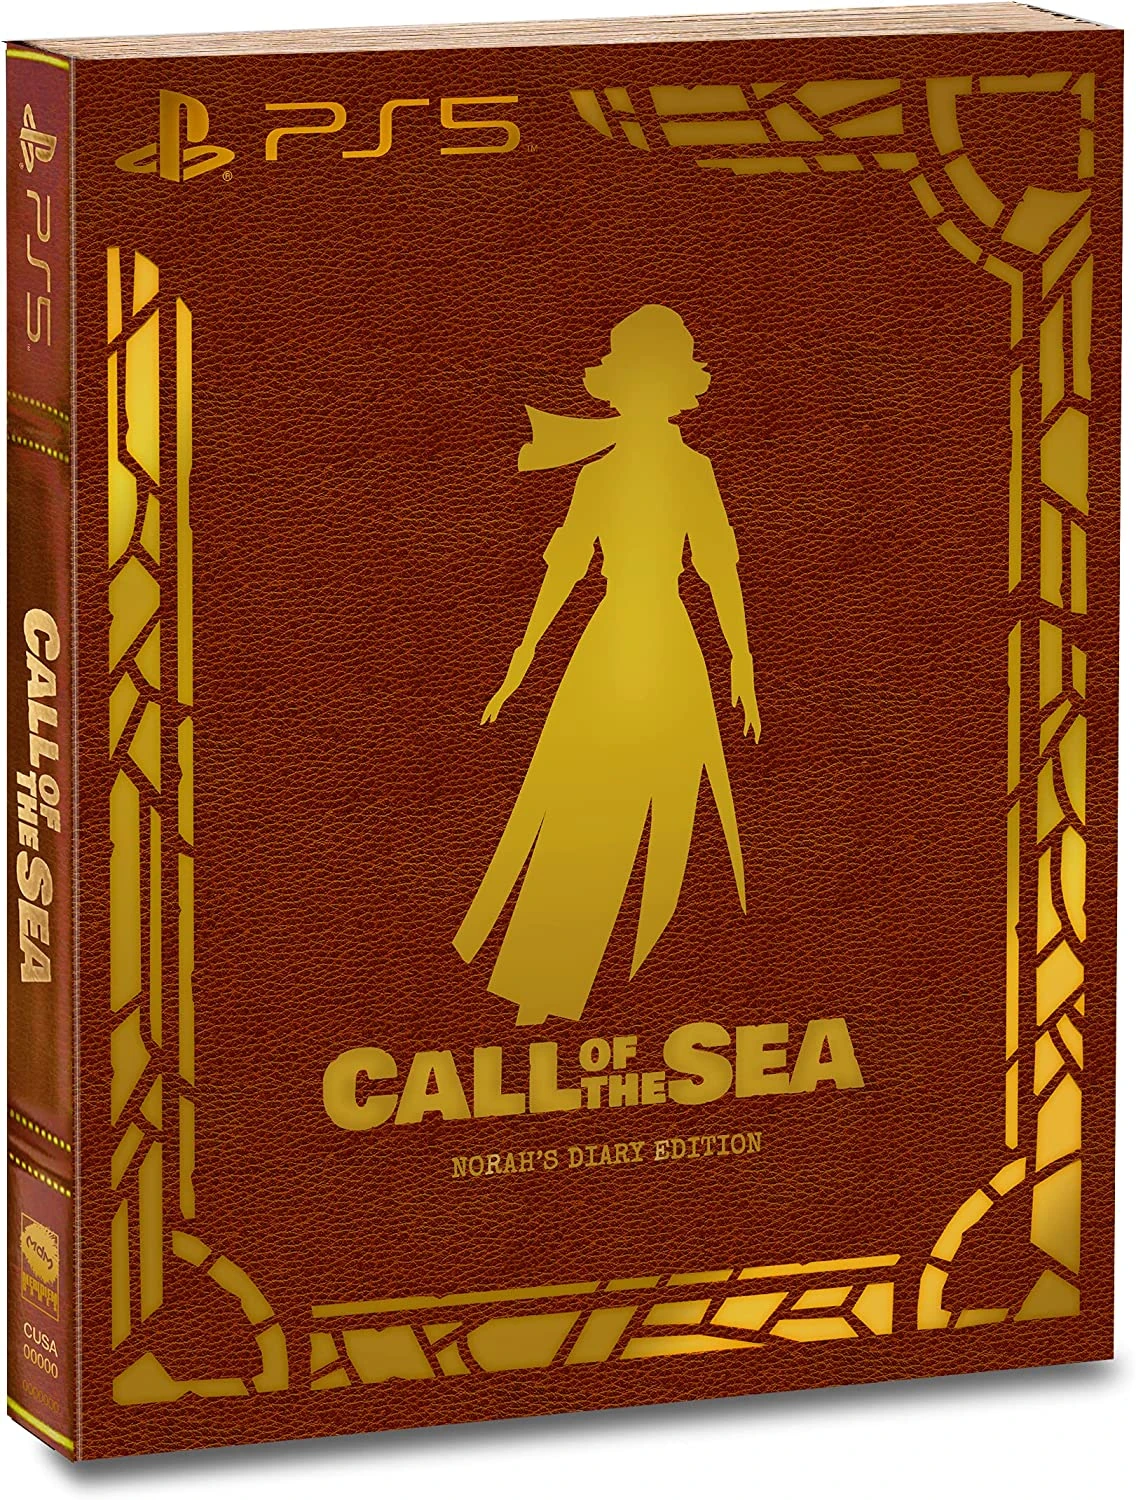 Call Of The Sea - Norah's Diary Edition